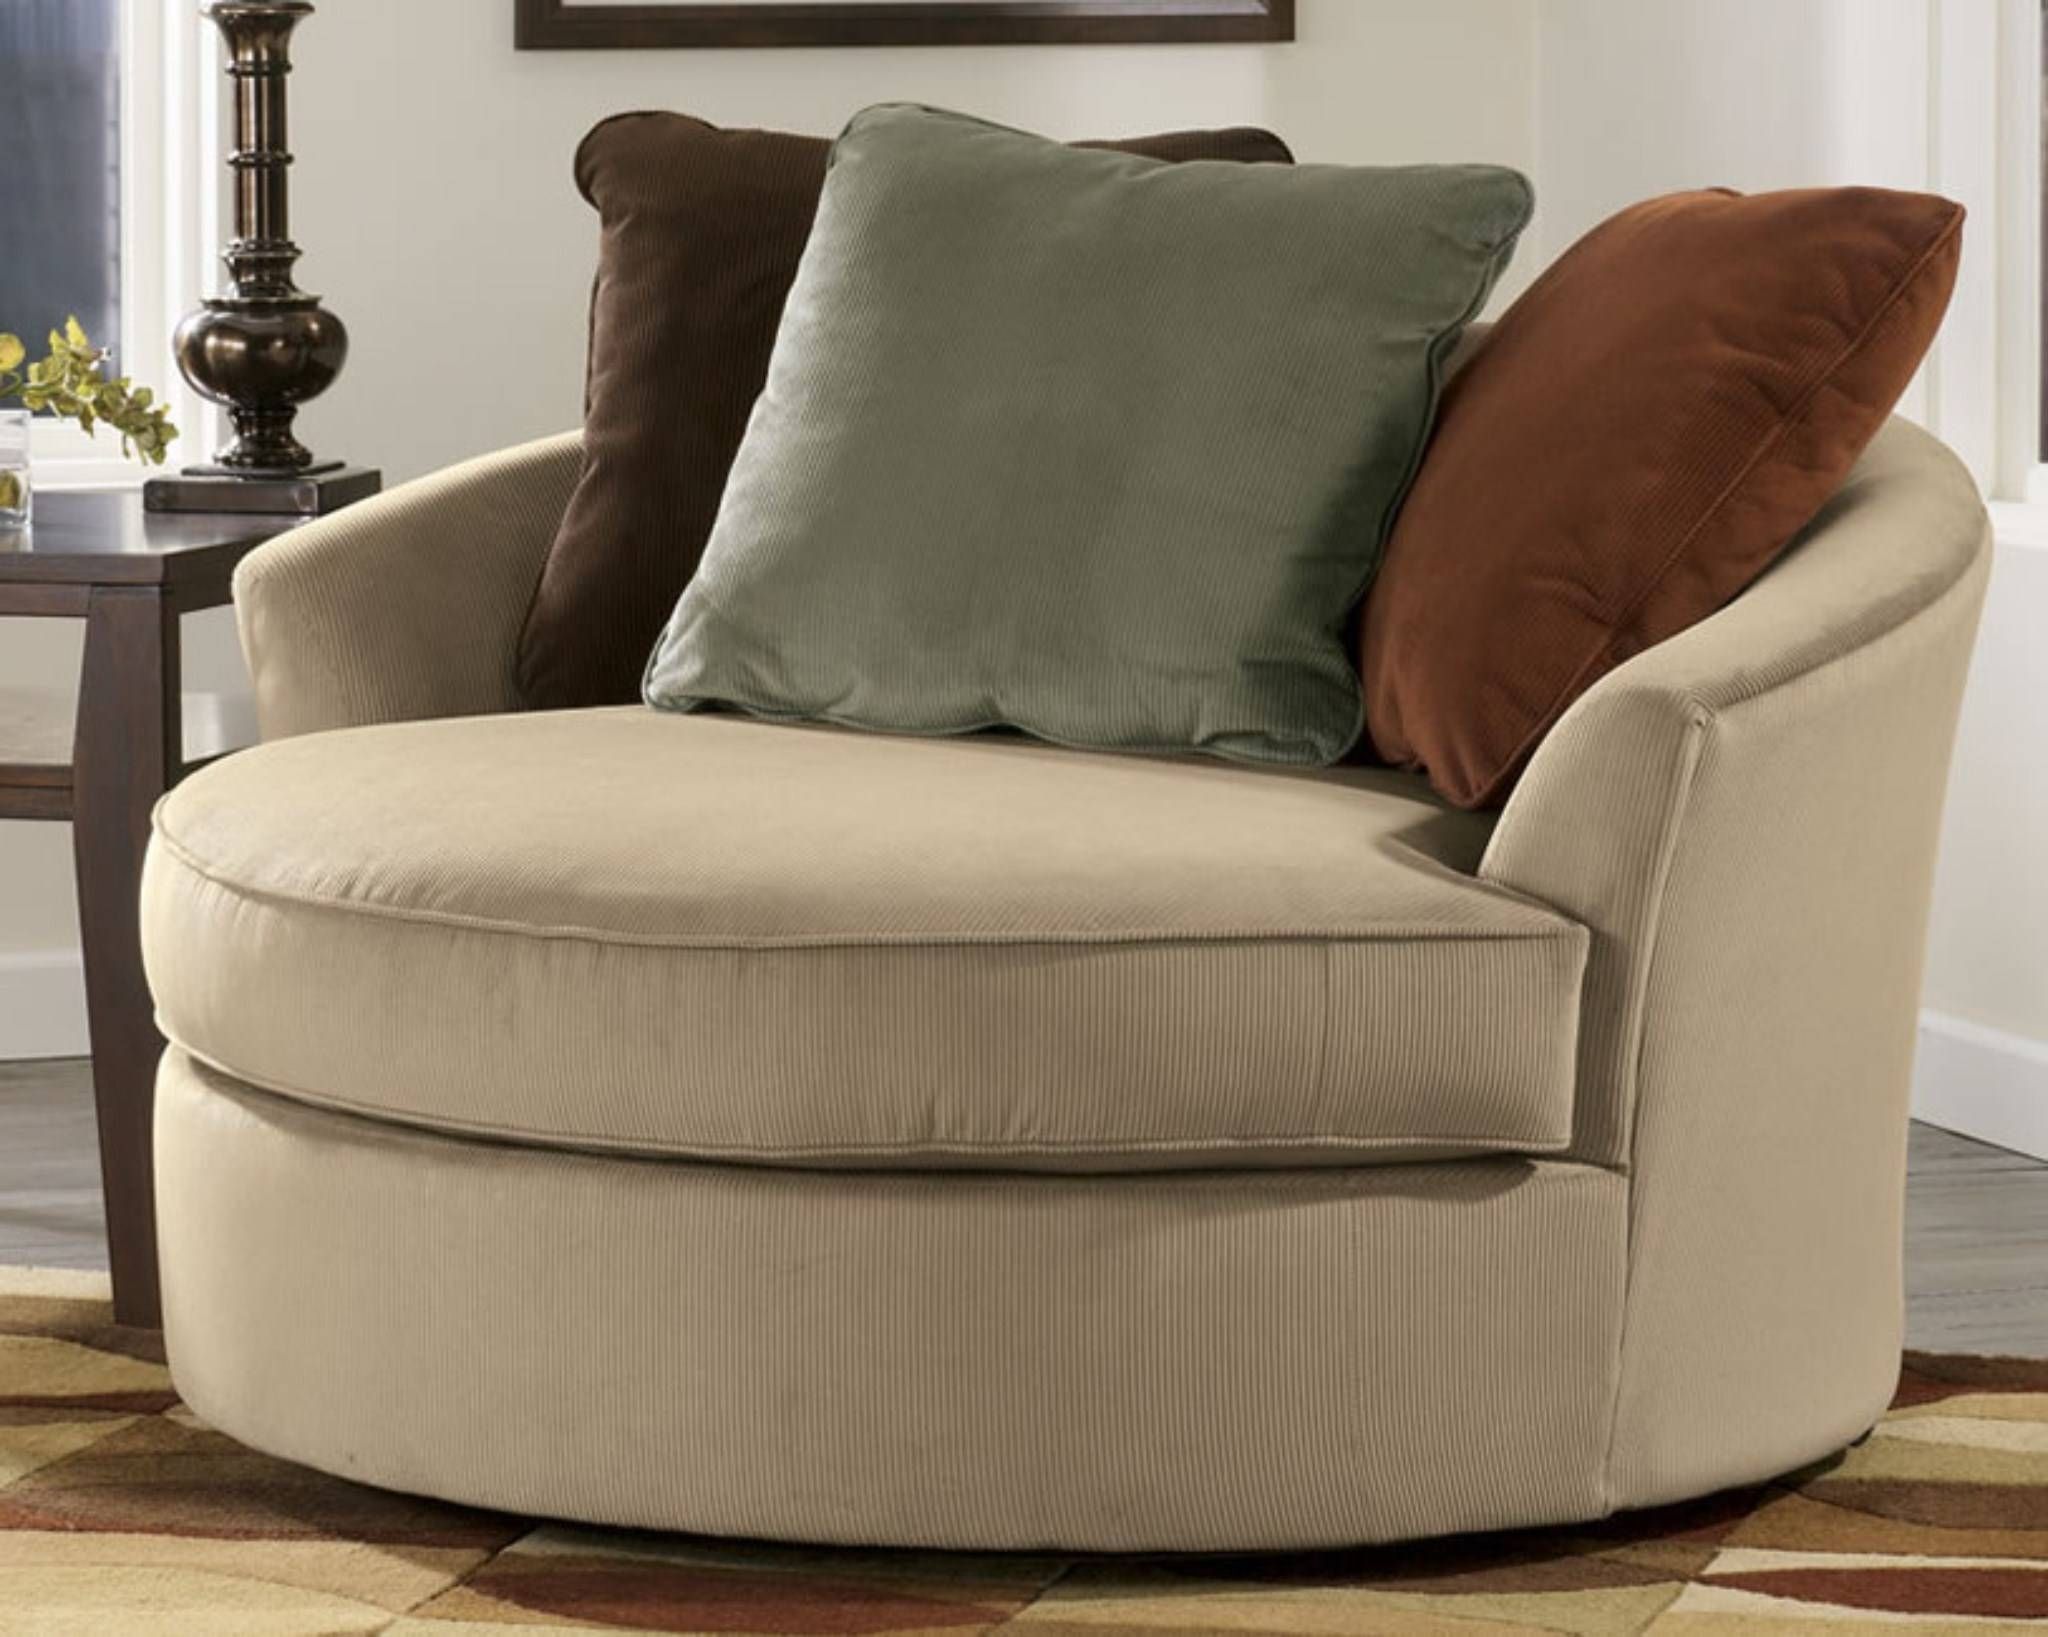 leather sofa with swivel chair